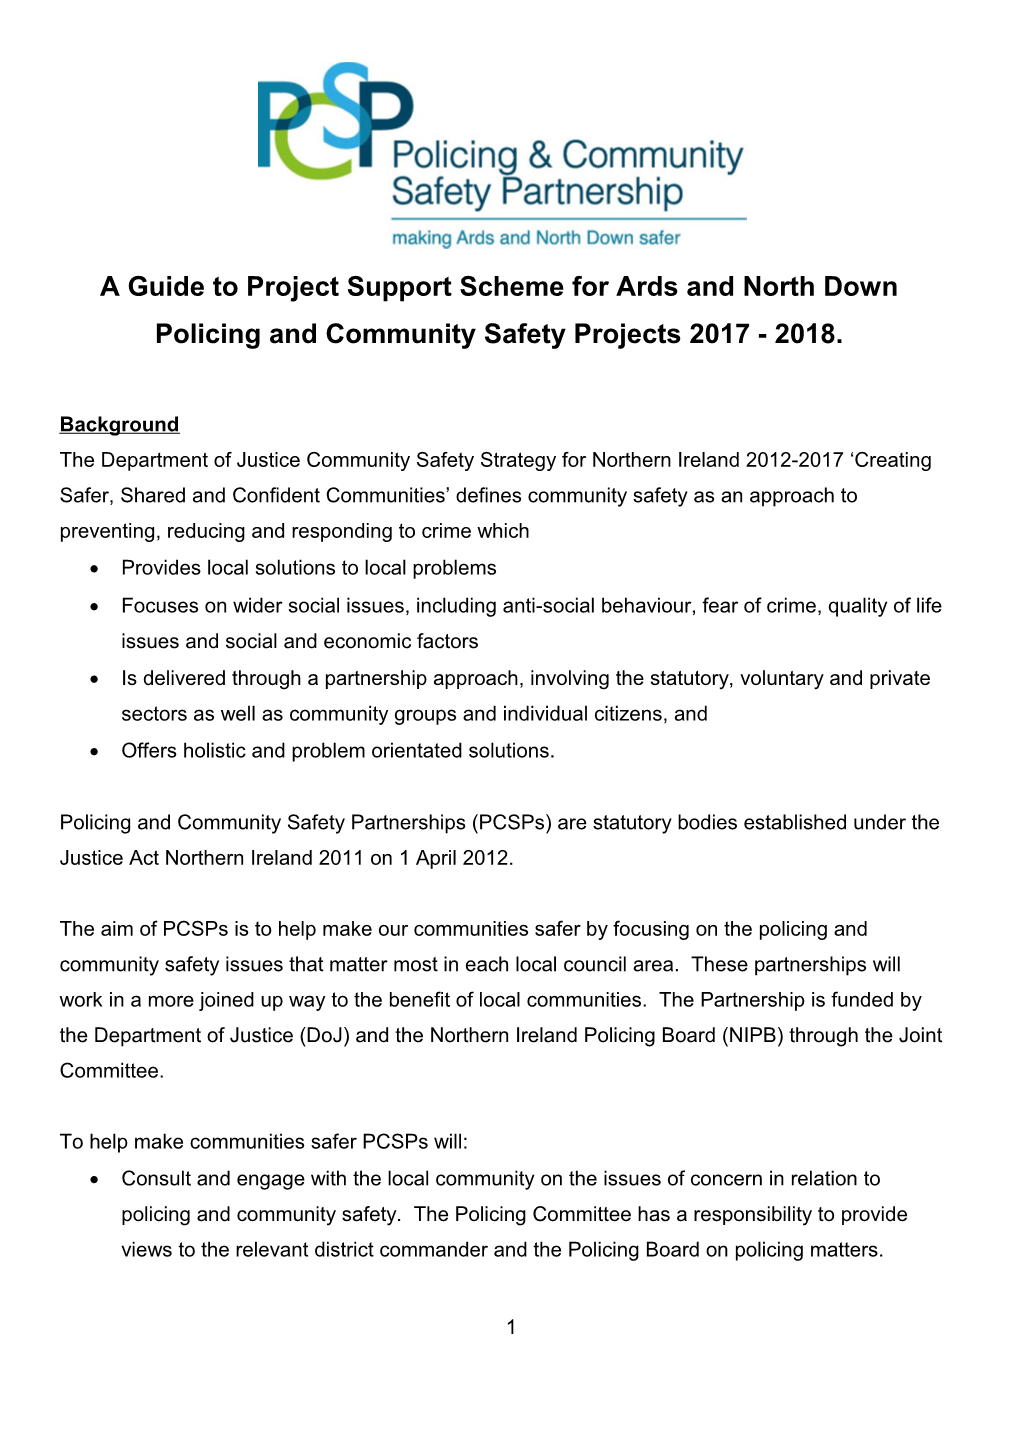 A Guide to Project Support Scheme for Ards and North Down